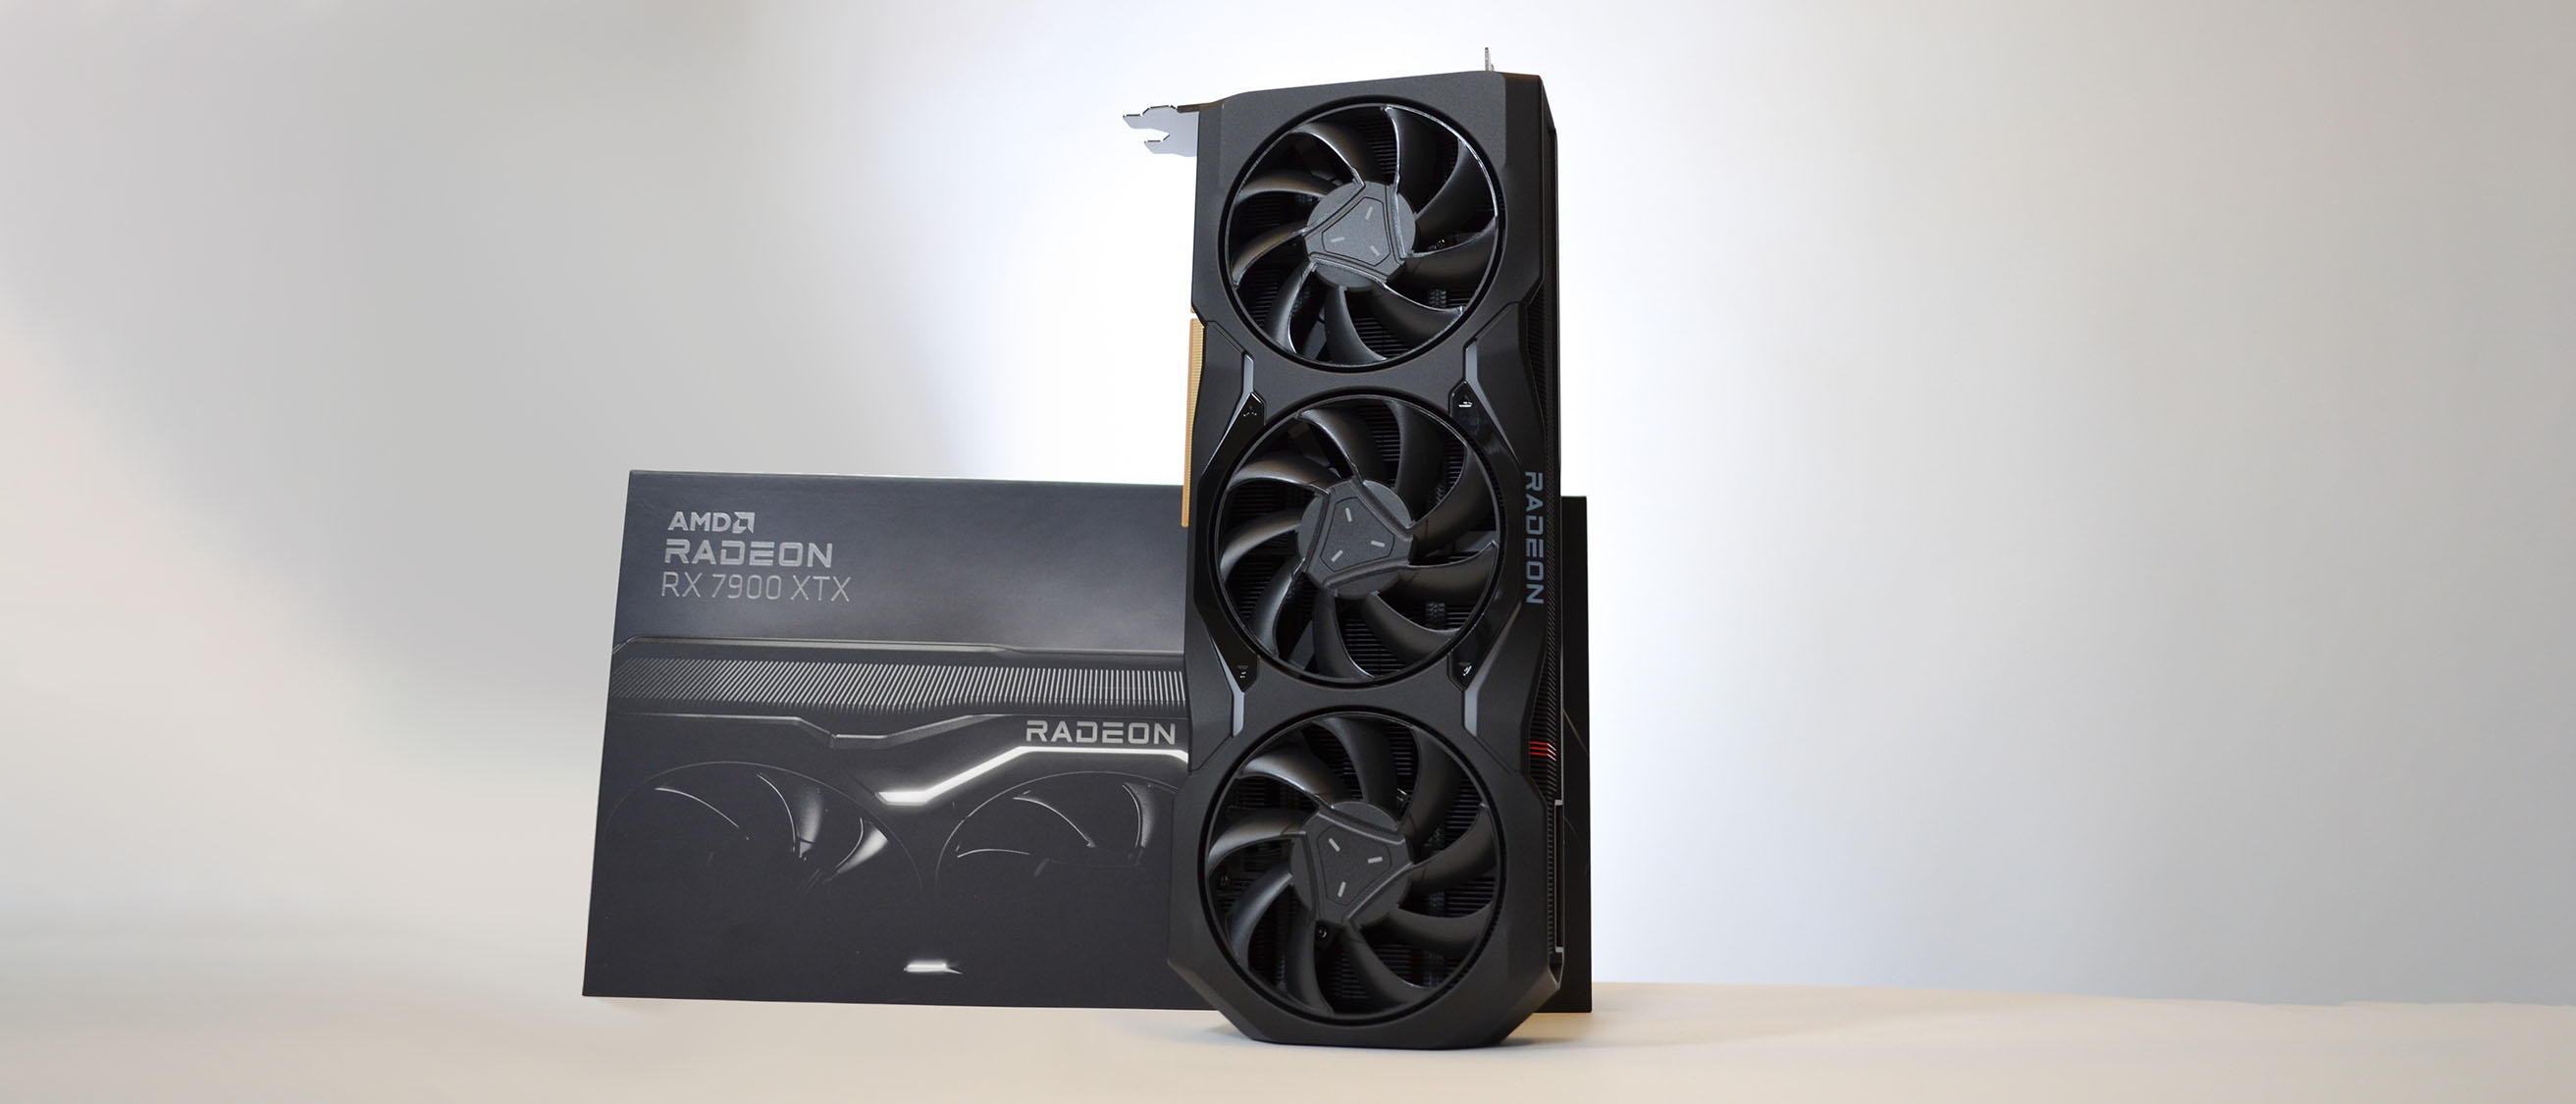 AMD Radeon RX 7900 XTX and XT review: Stellar performance and value